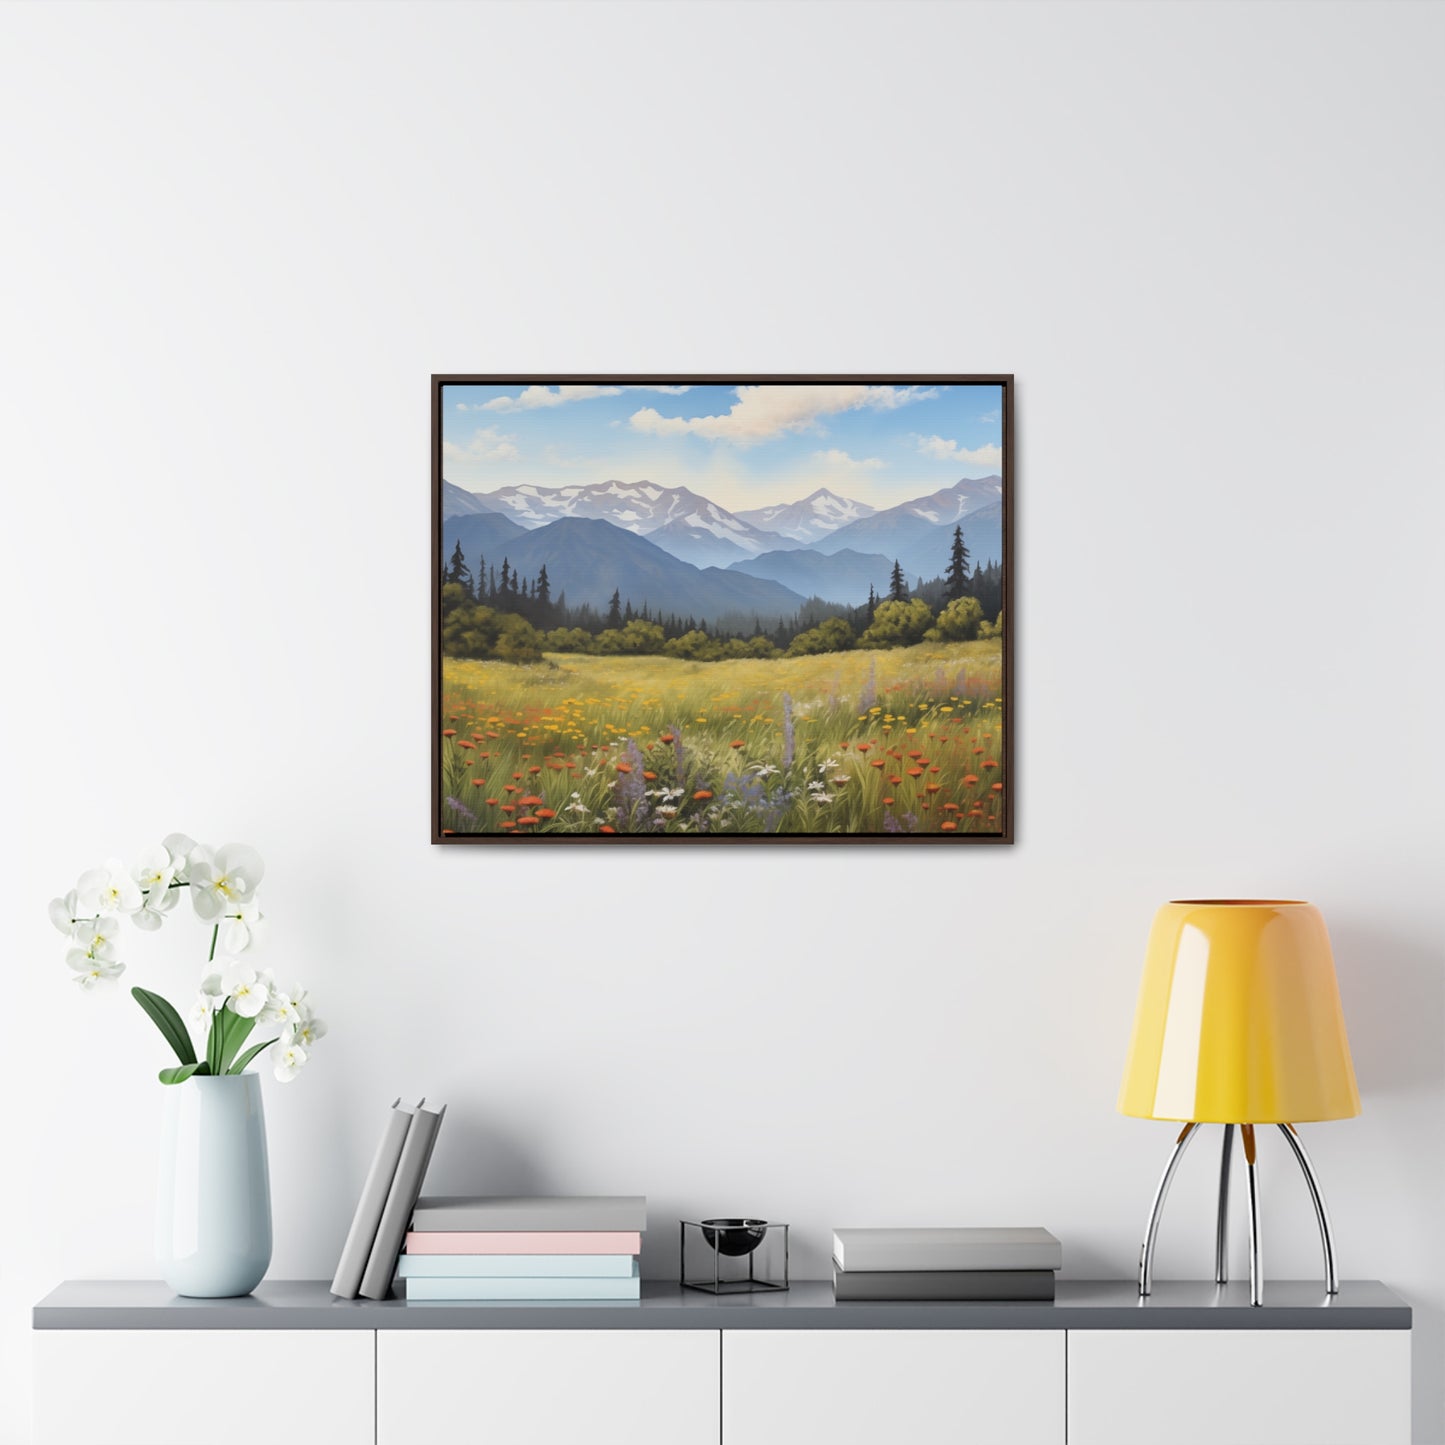 Field of Wild Flowers - Gallery Canvas Wrap, Horizontal Frame